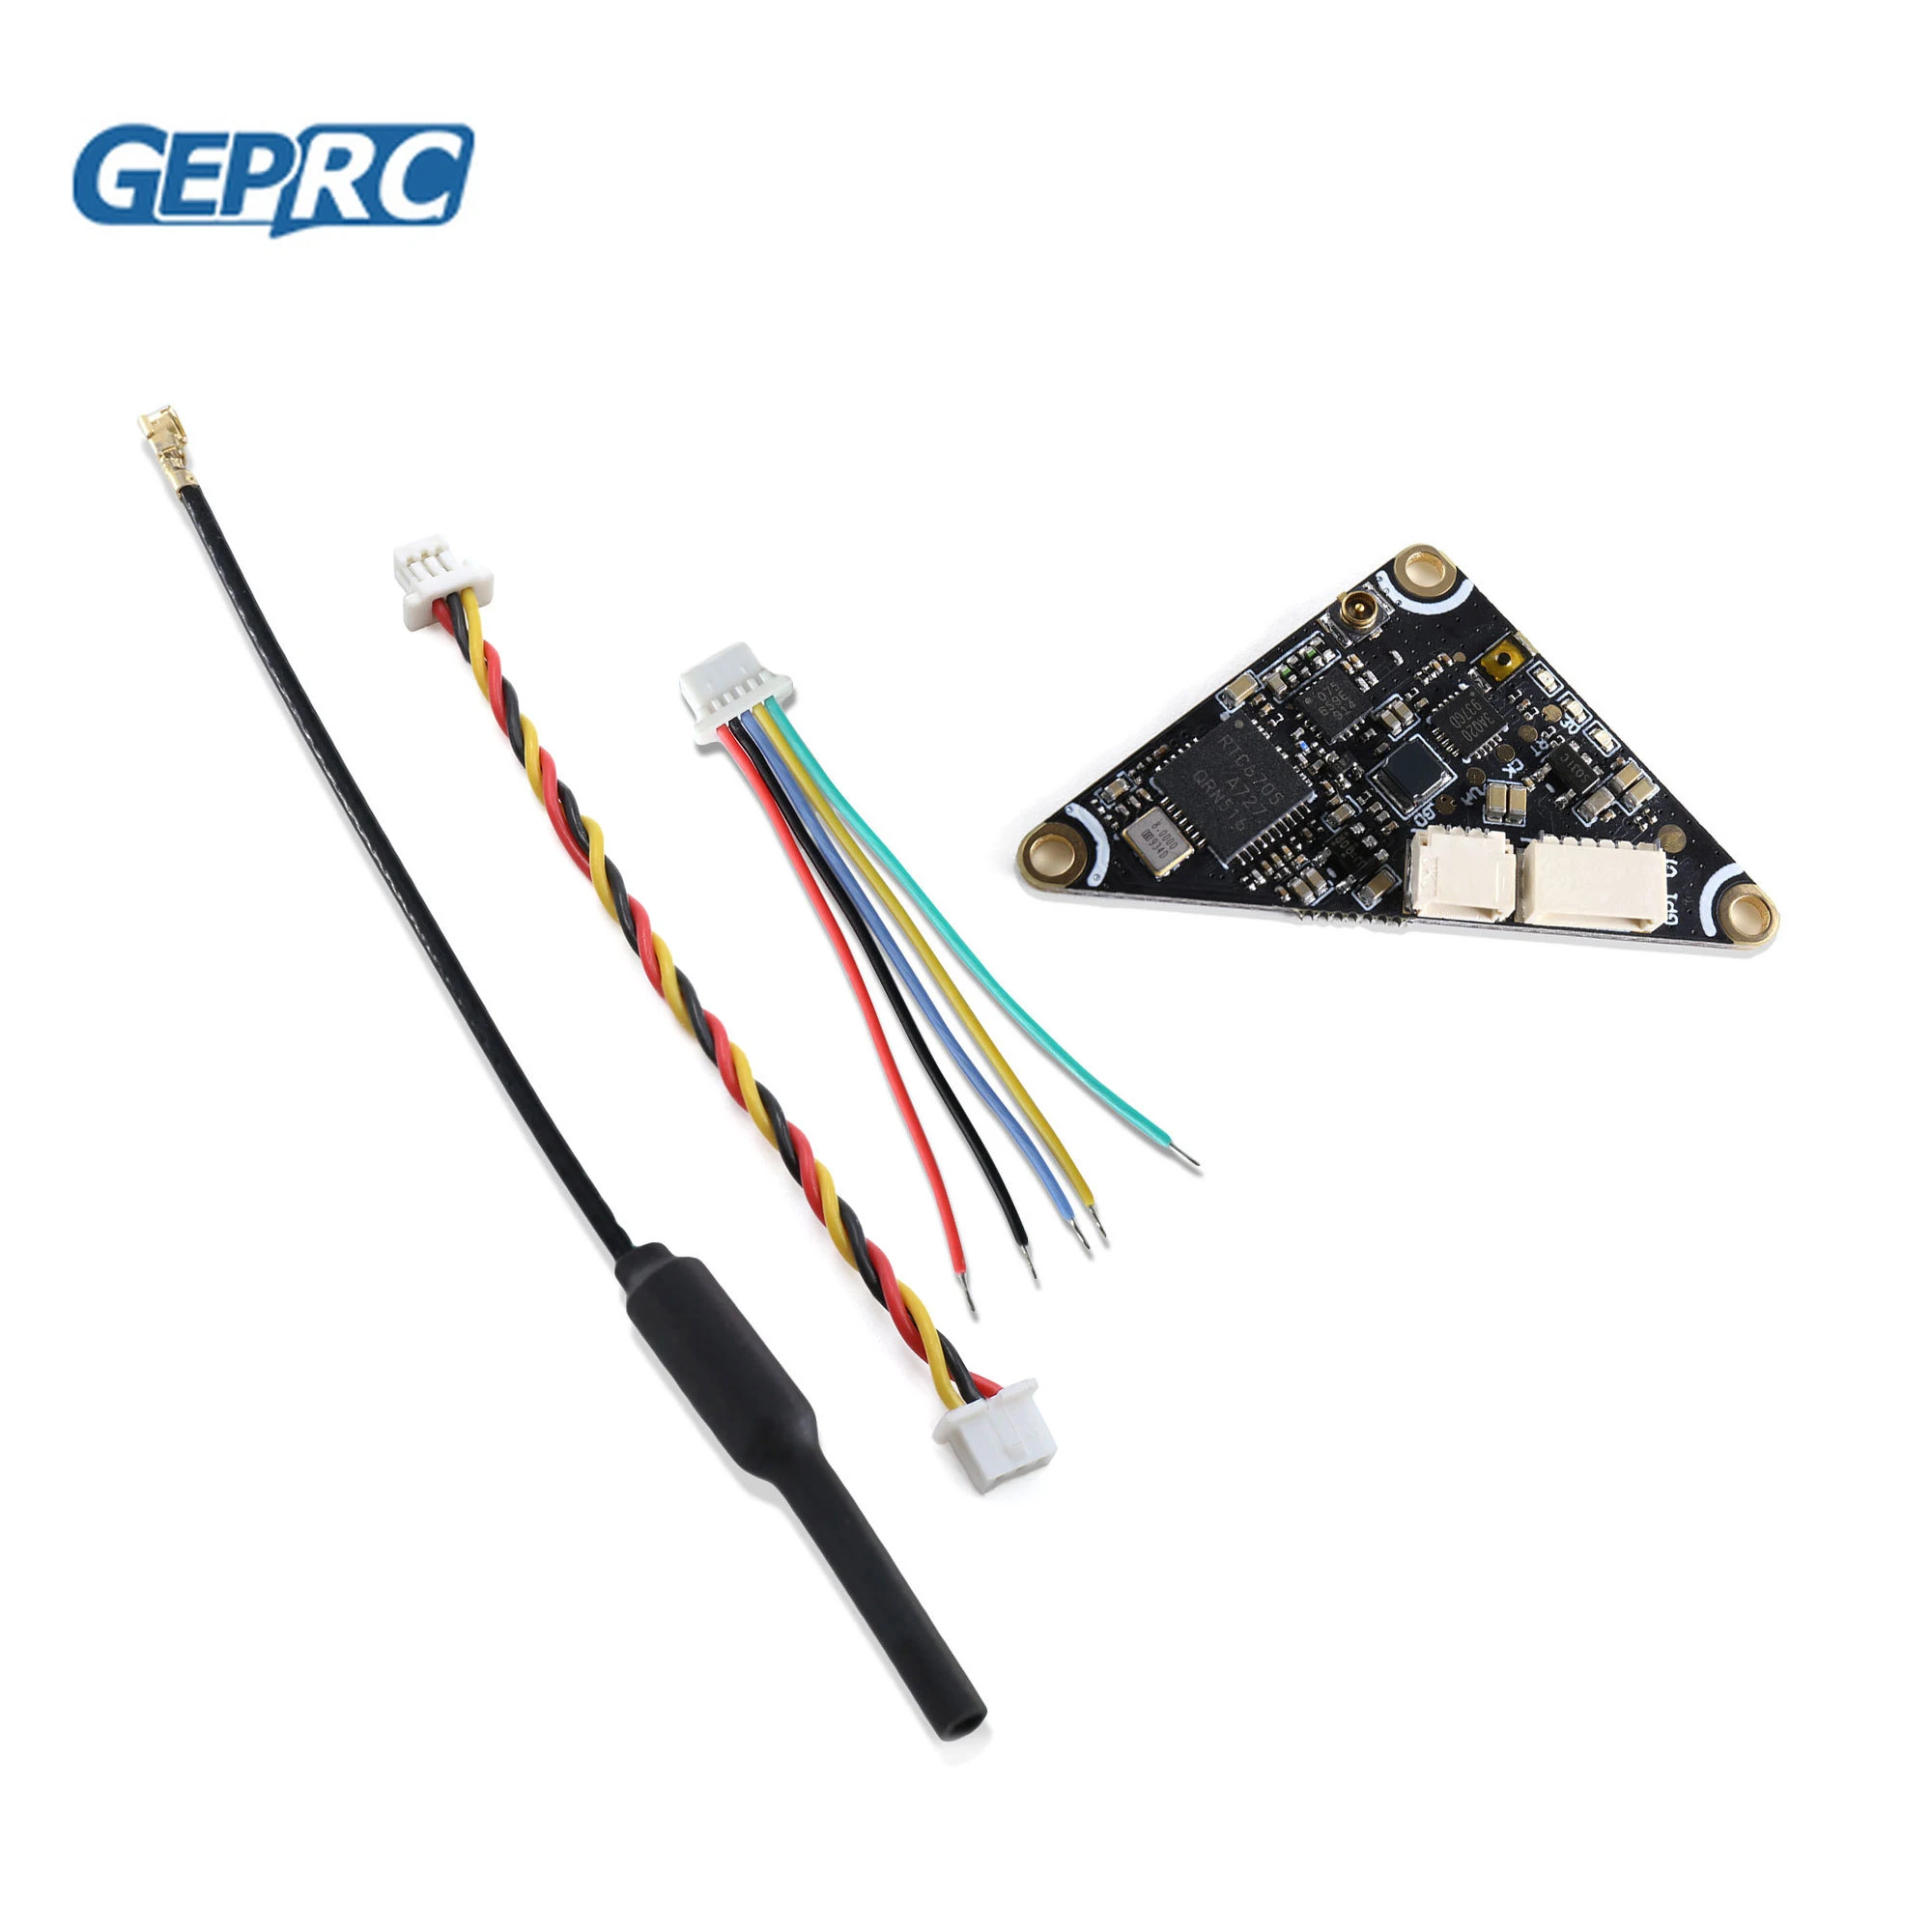 

GEPRC GEP-VTX200-Whoop 5.8GHz 48CH Pit 25/100/200mw VTX Flight Controller Switchable Transmitter for RC FPV Tinywhoop Drones